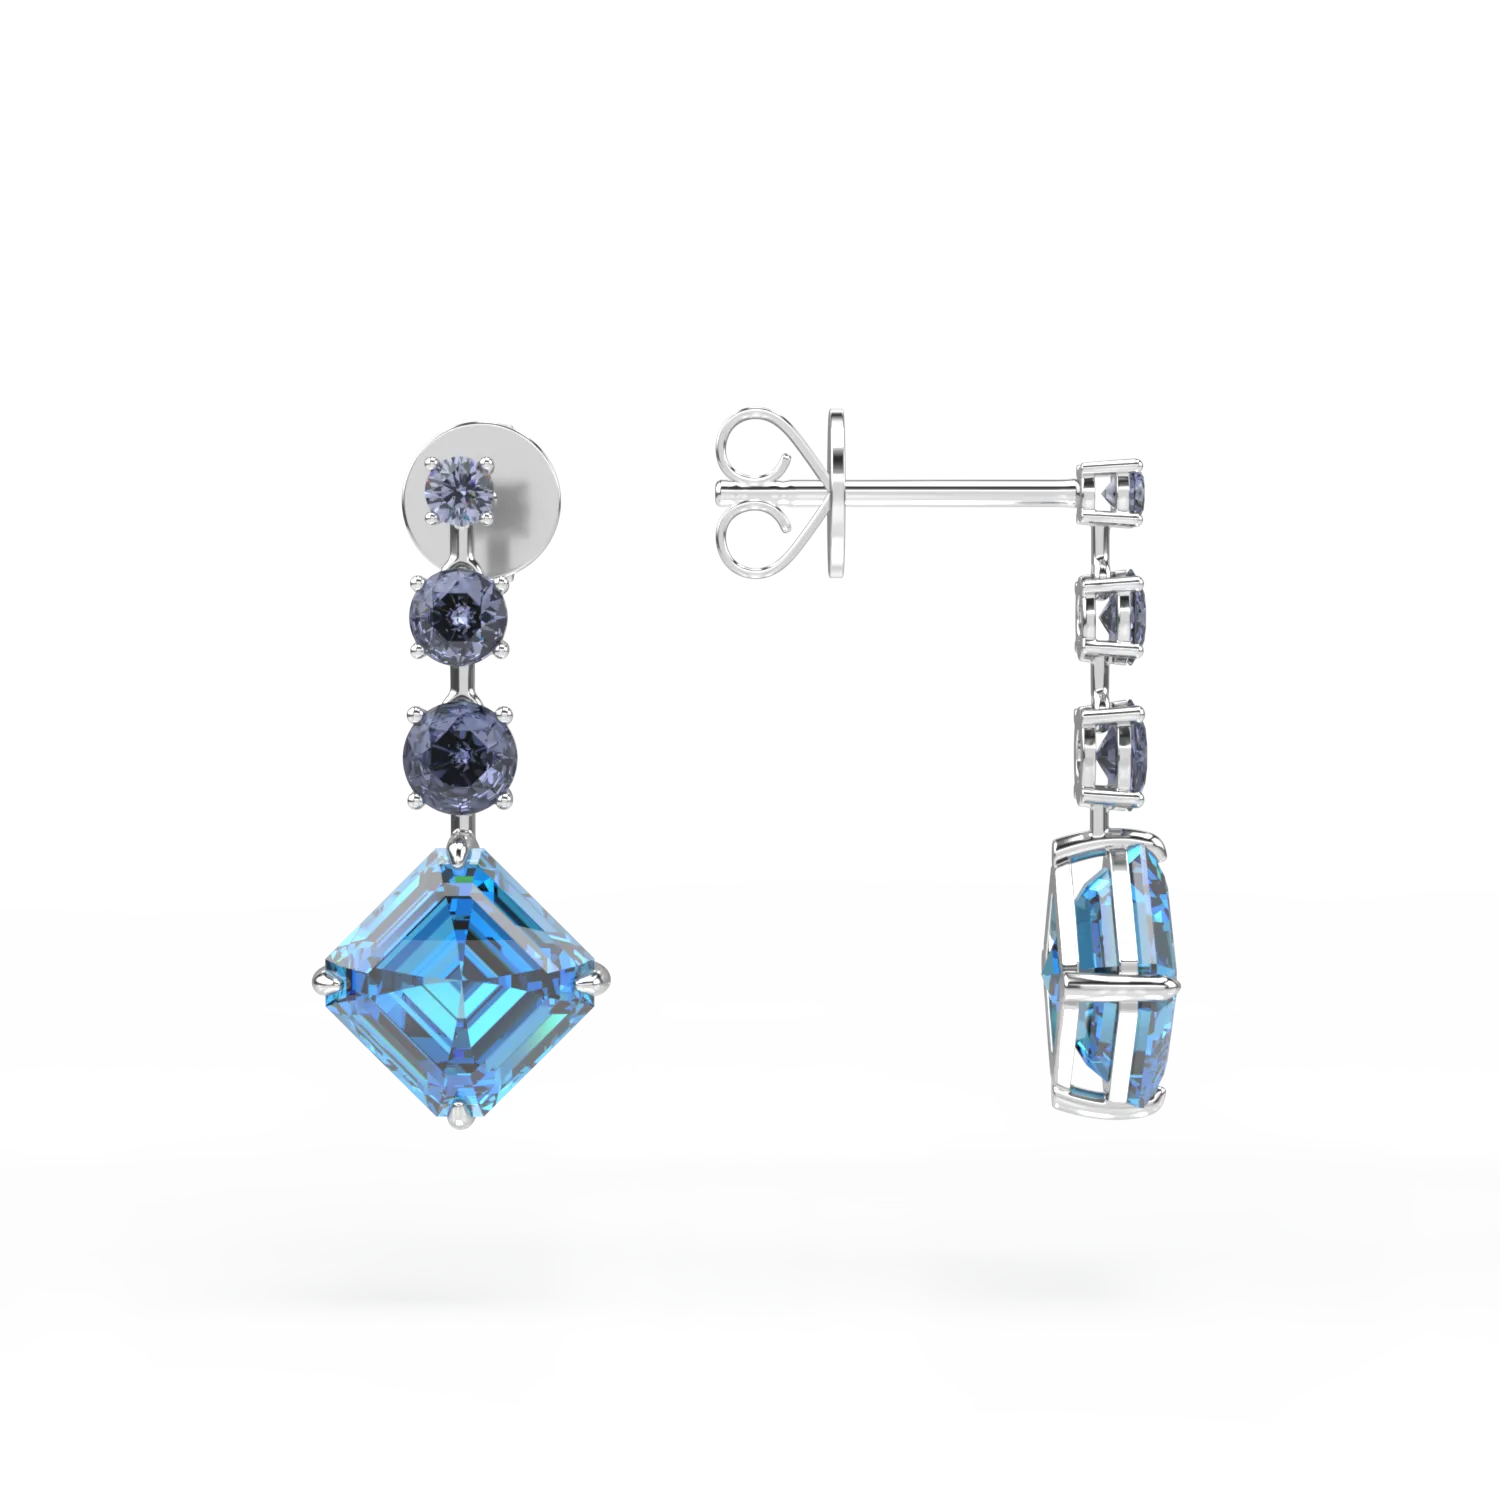 18K white gold earrings with blue topazes of 14ct and iolites of 1.9ct